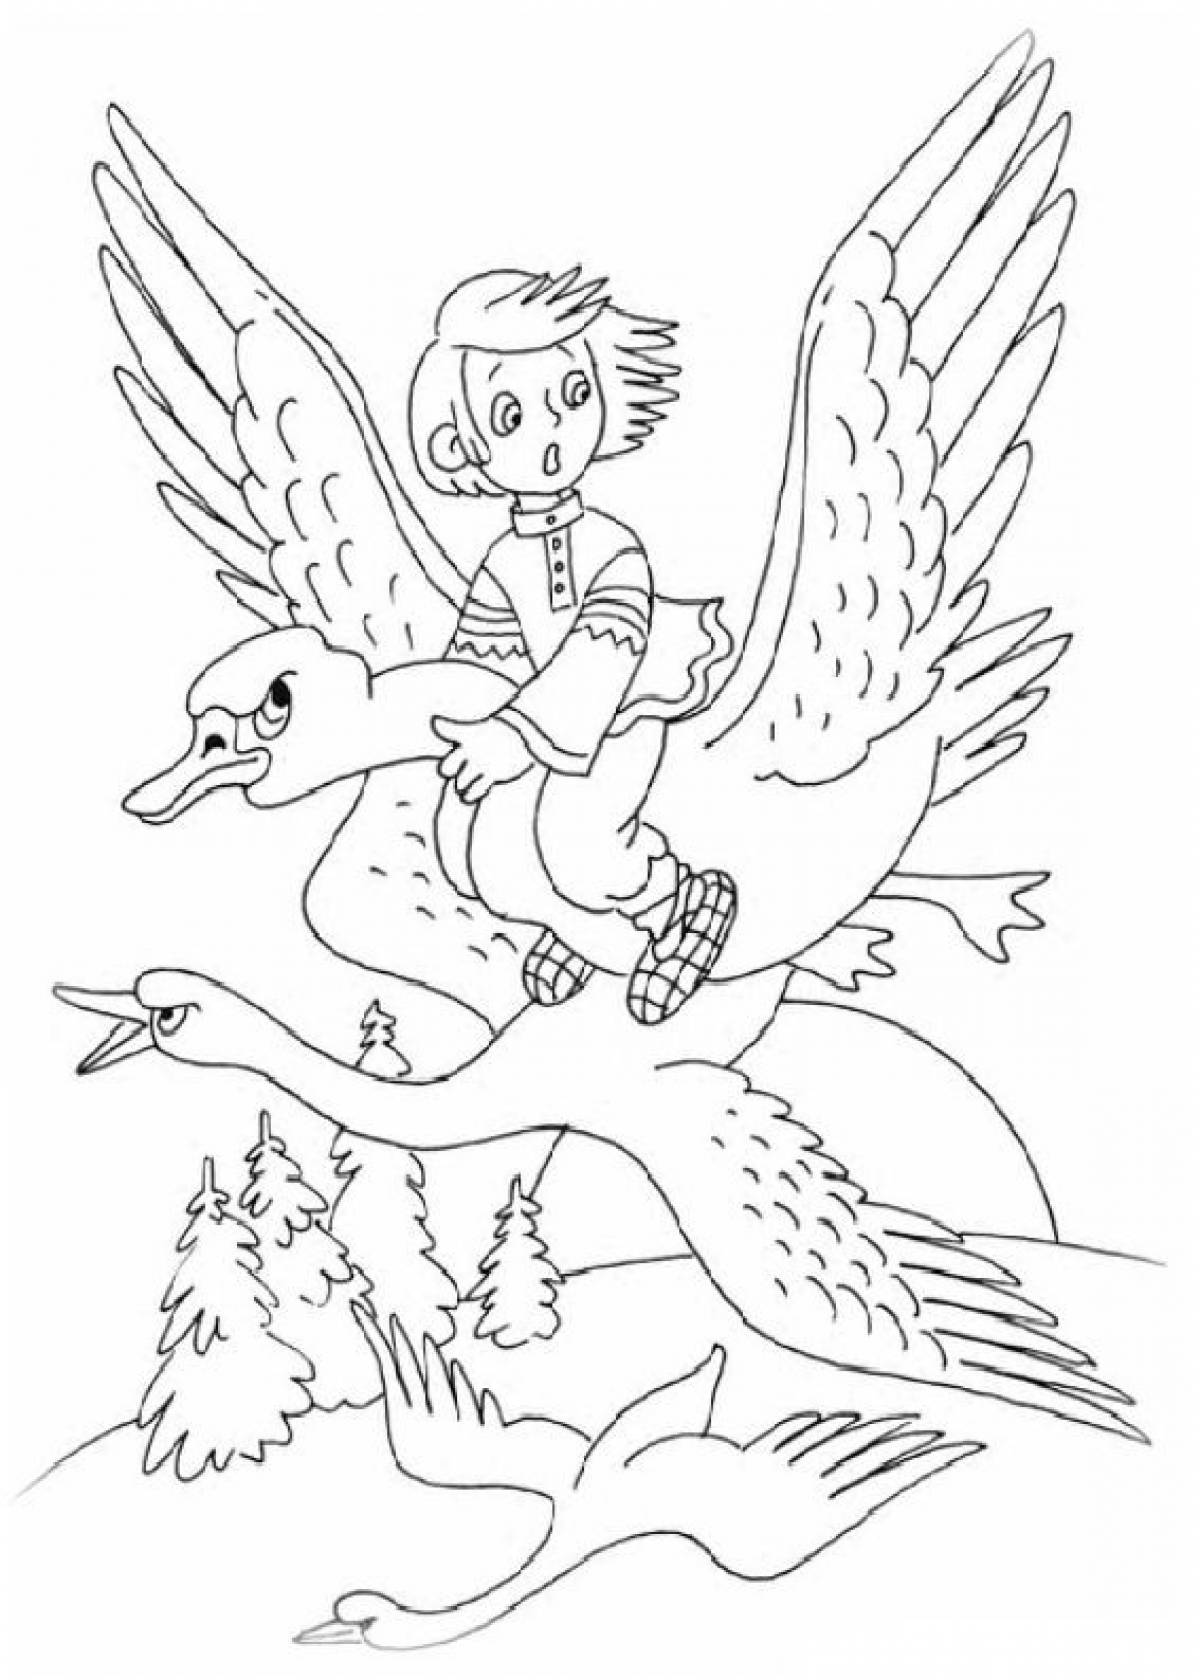 Coloring book heroes of fairy tales